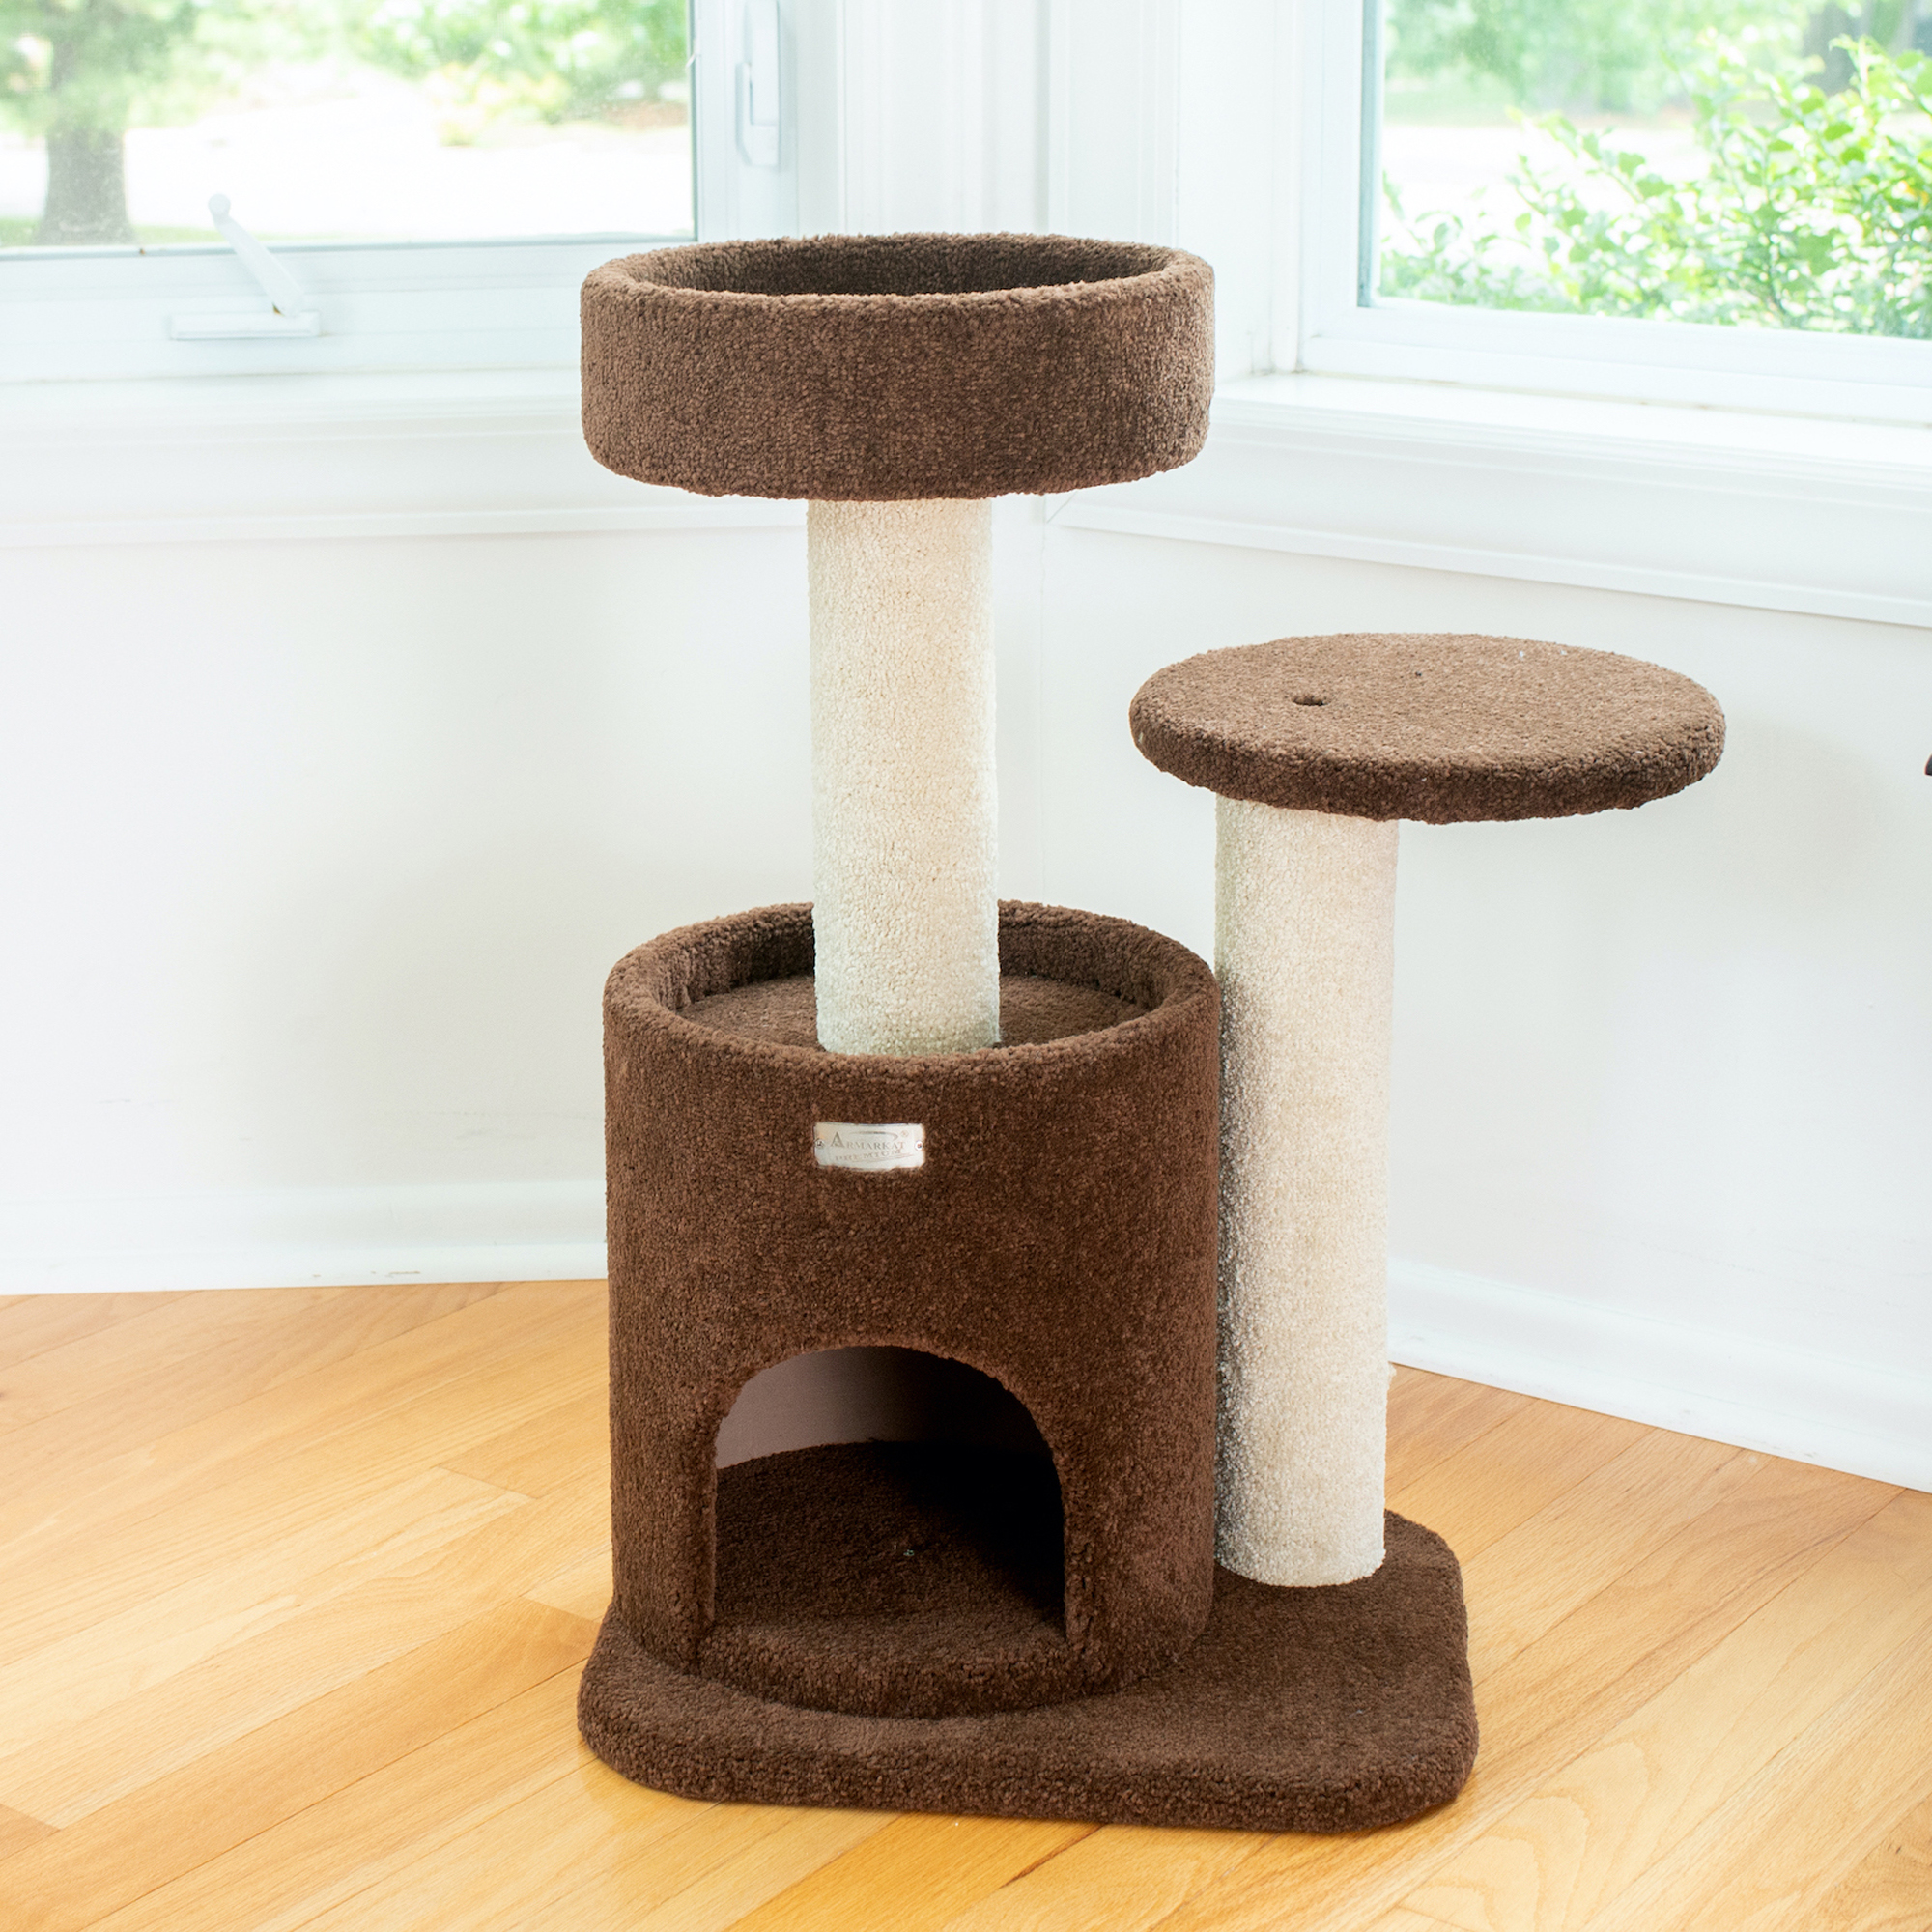 F3005 2013 New Design Armarkat Carpeted Cat Tree Gym Scratching Post F3005 Coffee Brown 30 Inch